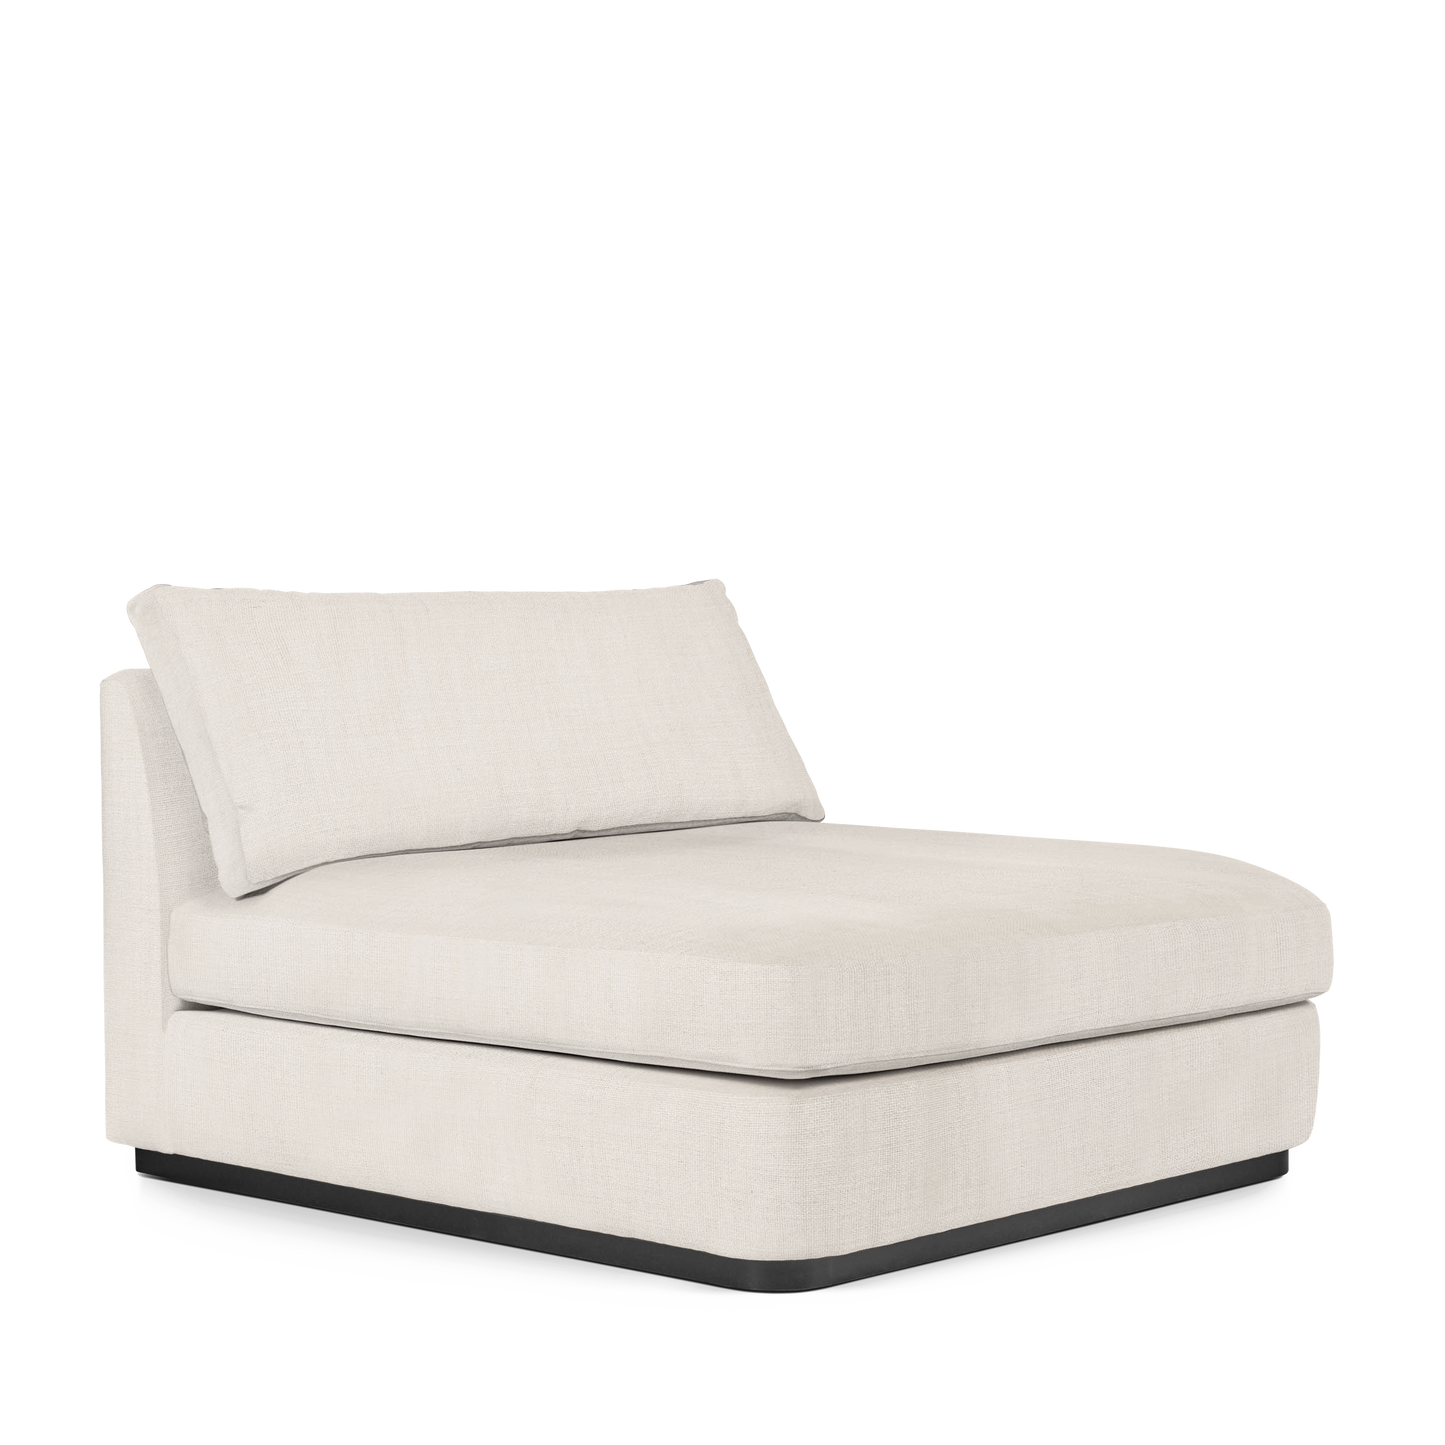 CALMA Lounge Bed with light grey textile 